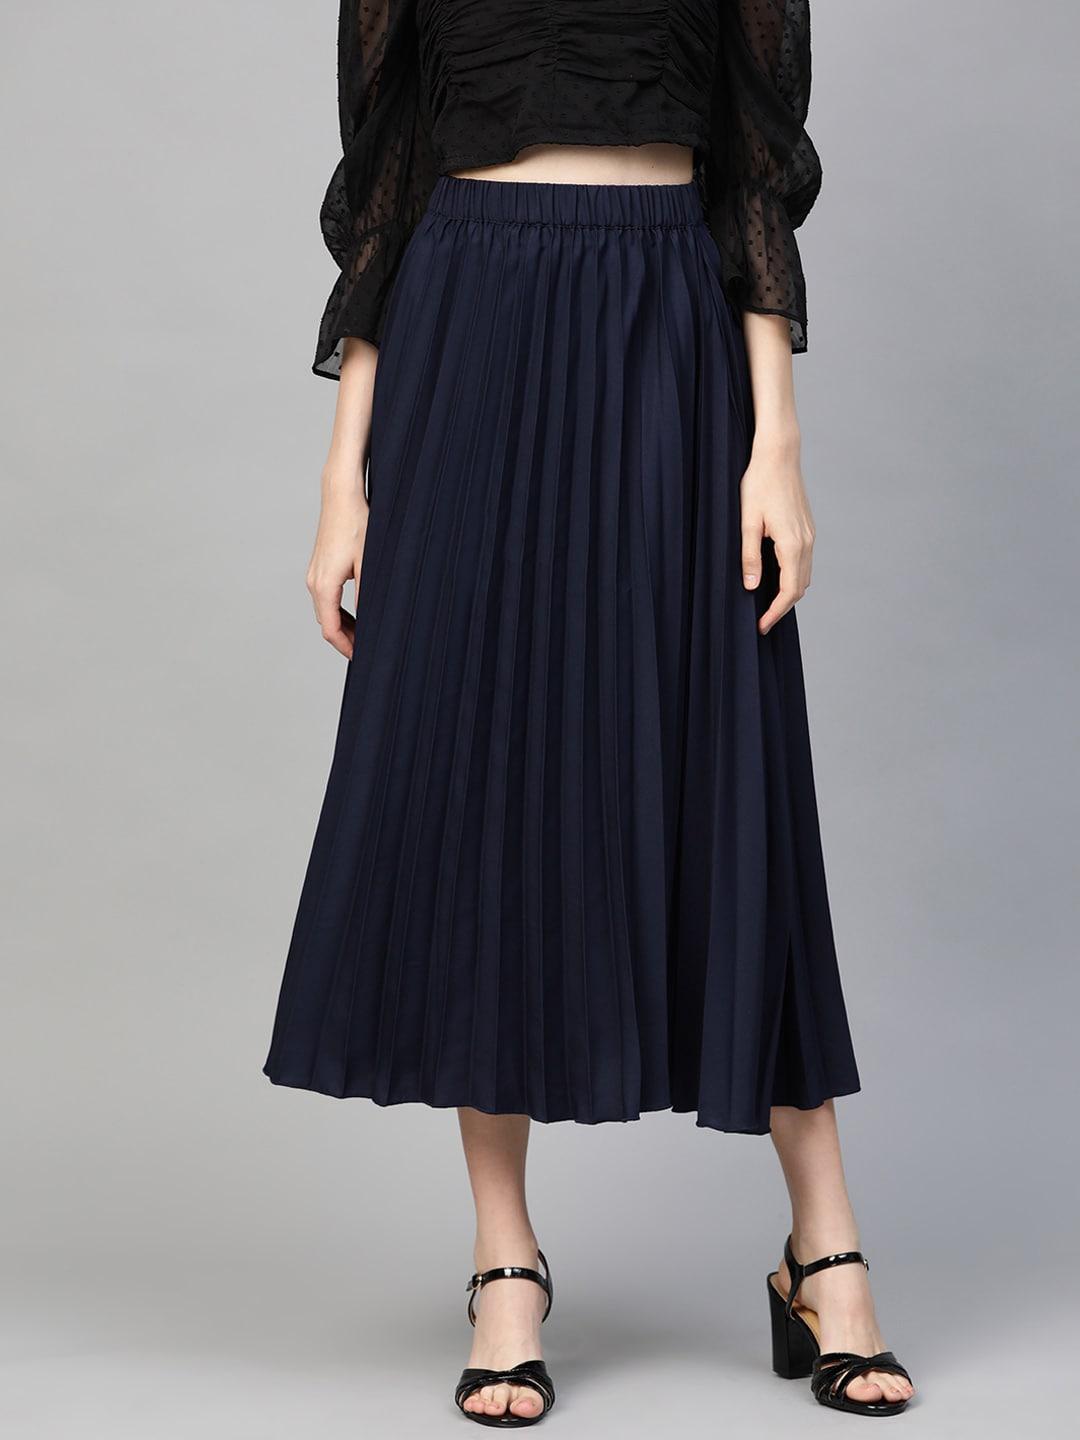 pluss women navy blue solid accordion pleated a-line skirt